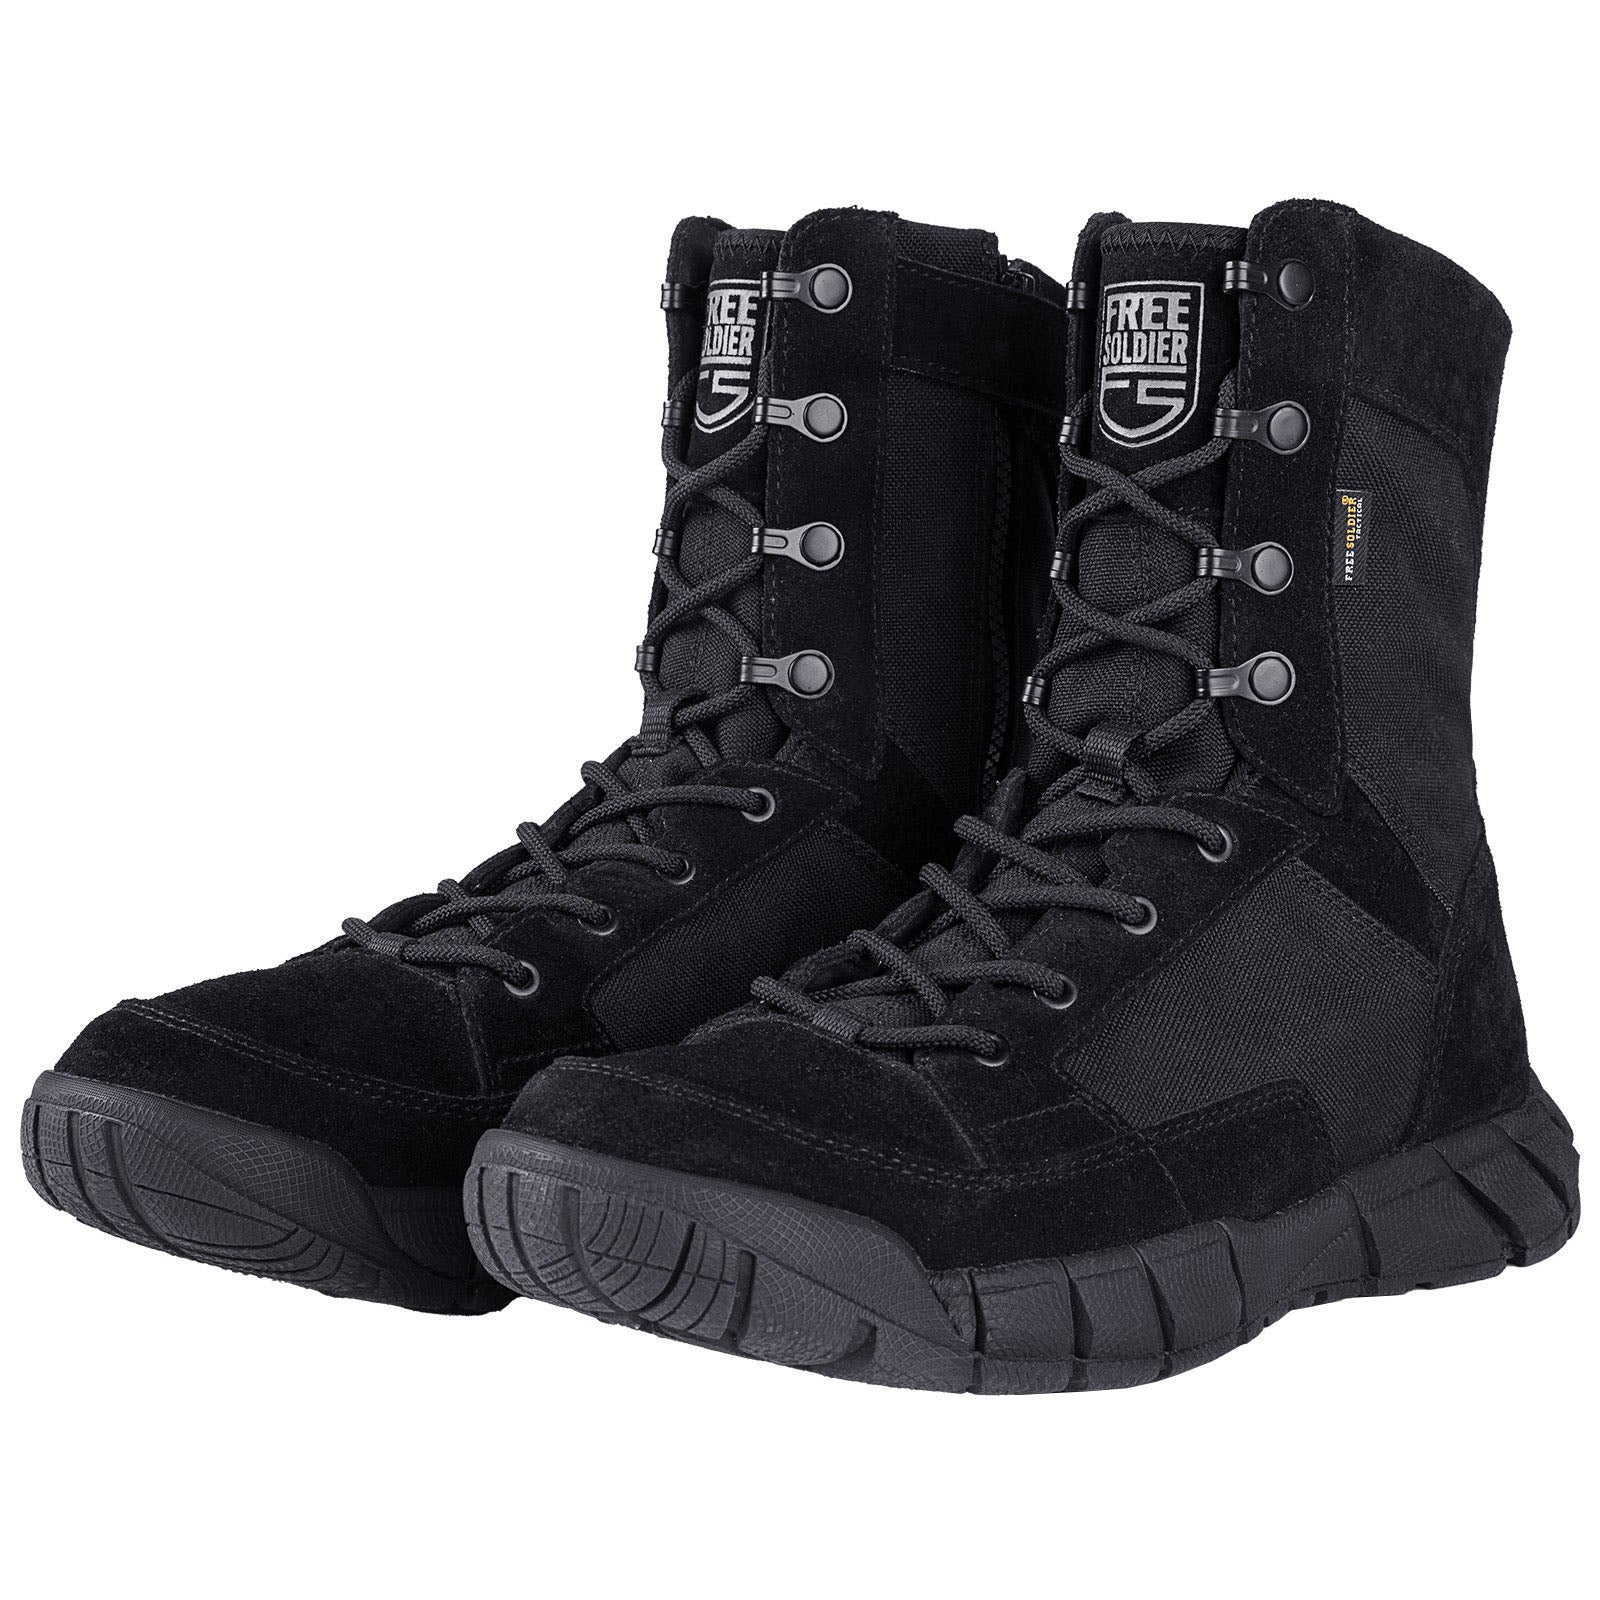 FreeSoldier Men's Tactical Military Boots